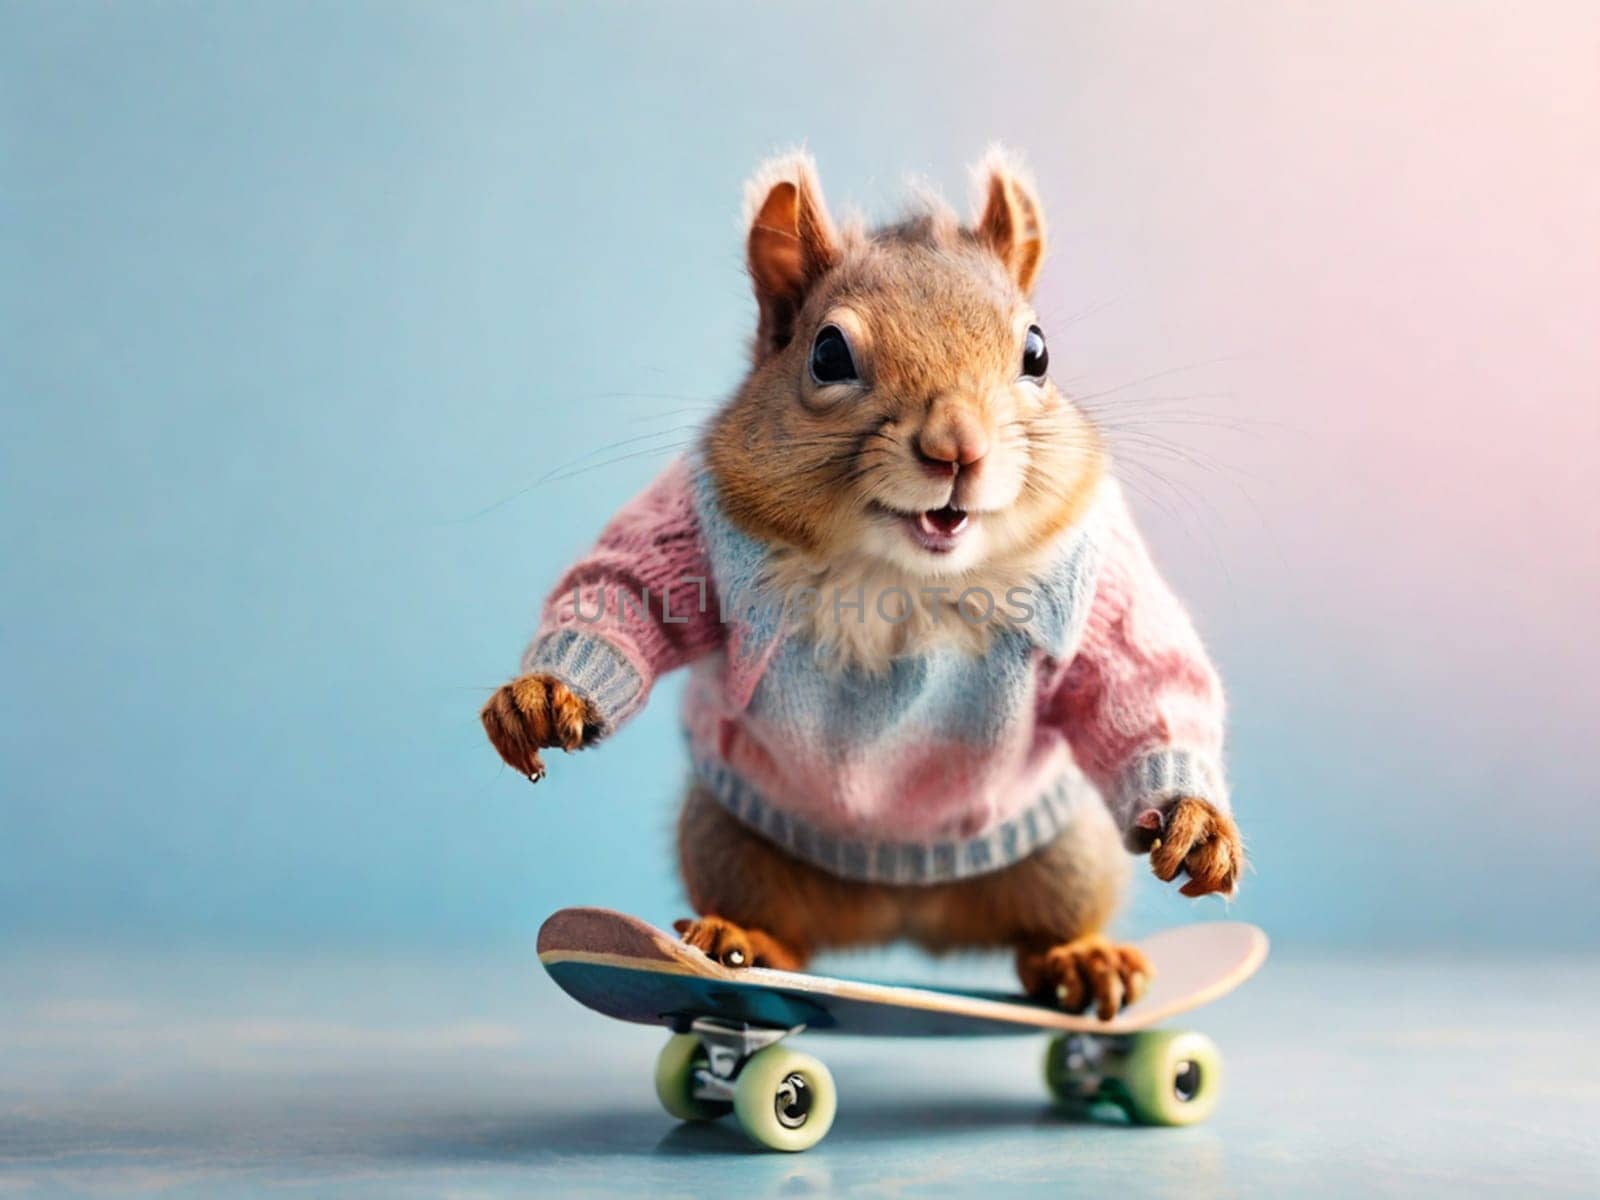 A funny squirrel in a sweater flies on a skateboard. by Ekaterina34